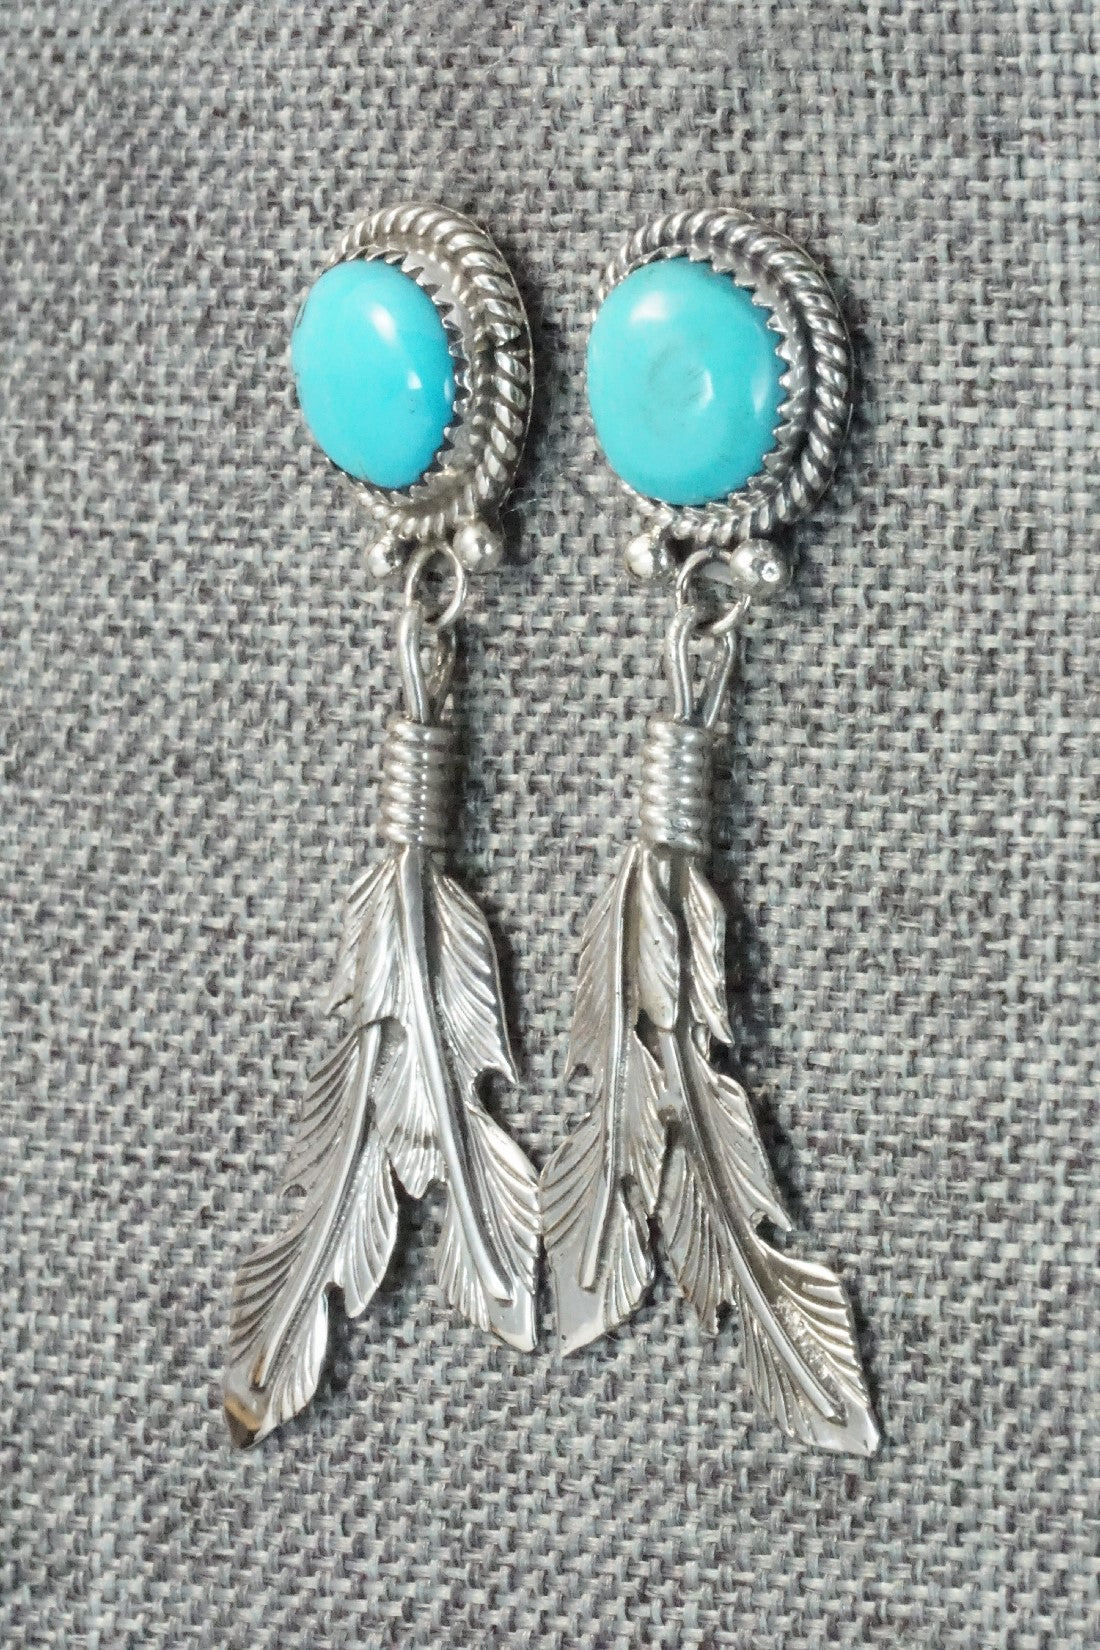 Turquoise and Sterling Silver Earrings - Annie Spencer